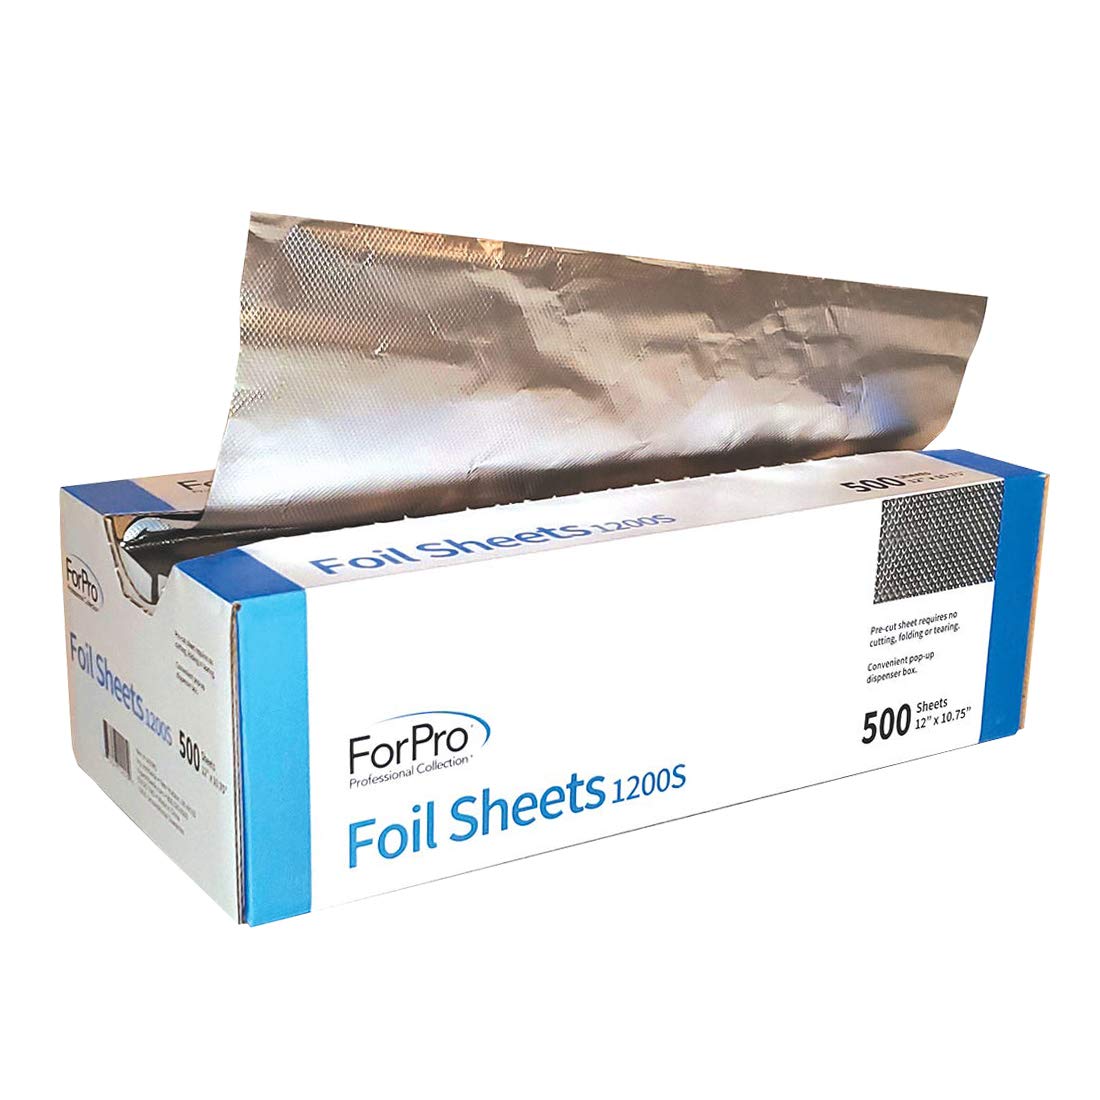 ForPro Embossed Pop-Up Foil Sheets 1200S, 12 Aluminium Foil Sheets, Pop-Up  Dispenser, for Hair Color Application and Highlighting, Food Safe, 12 W x  10.75 L, 500-Count 500-Count (Pack of 1)